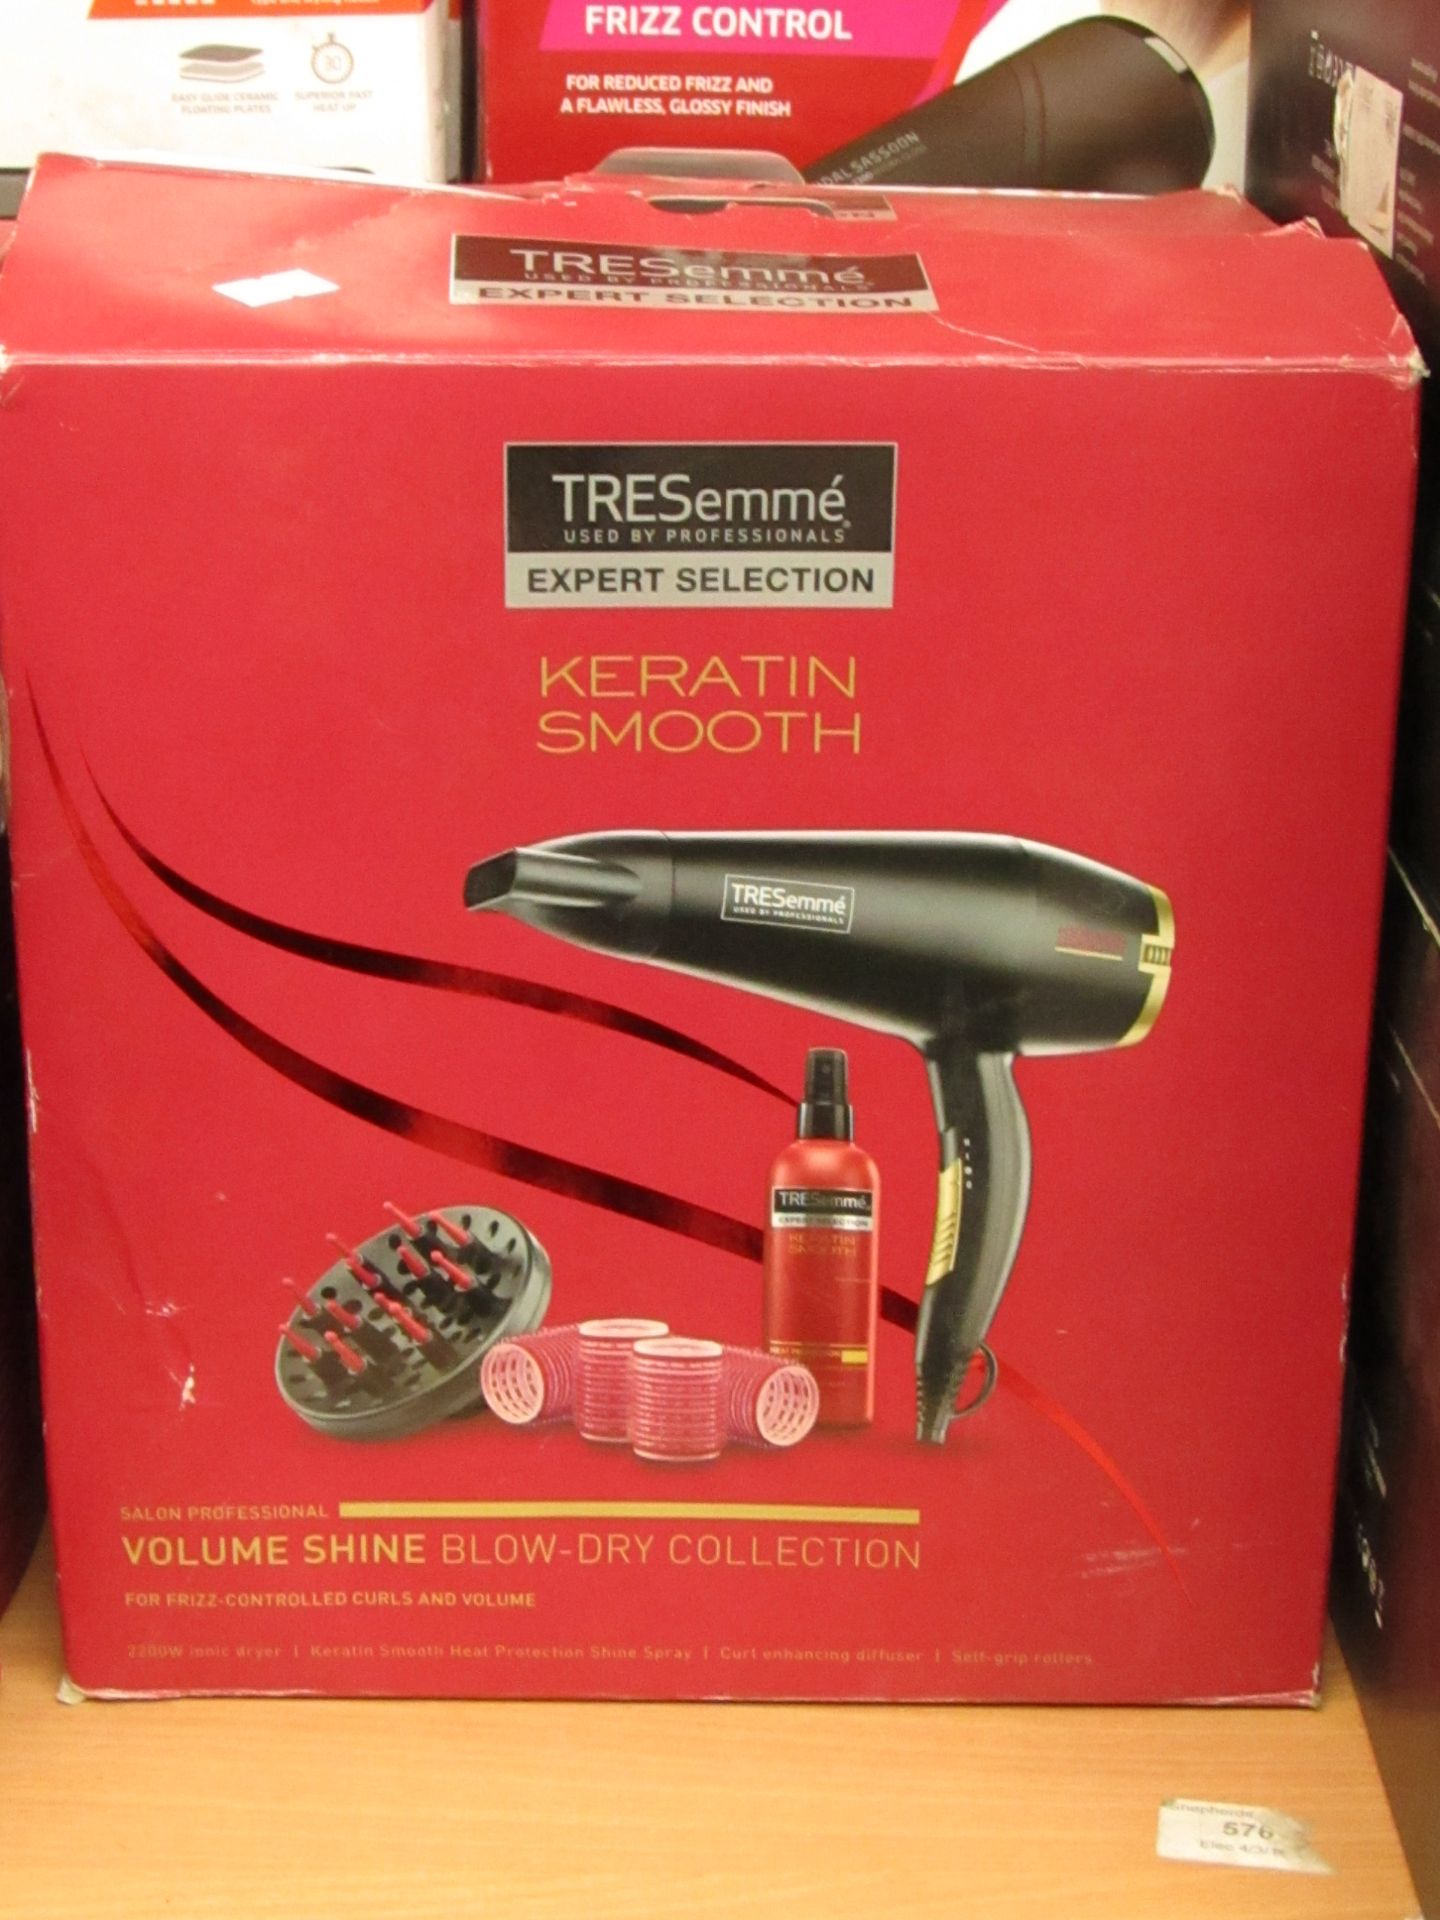 TRESemmé Keratin Smooth volume shine hair dryer, vendor suggests tested working.